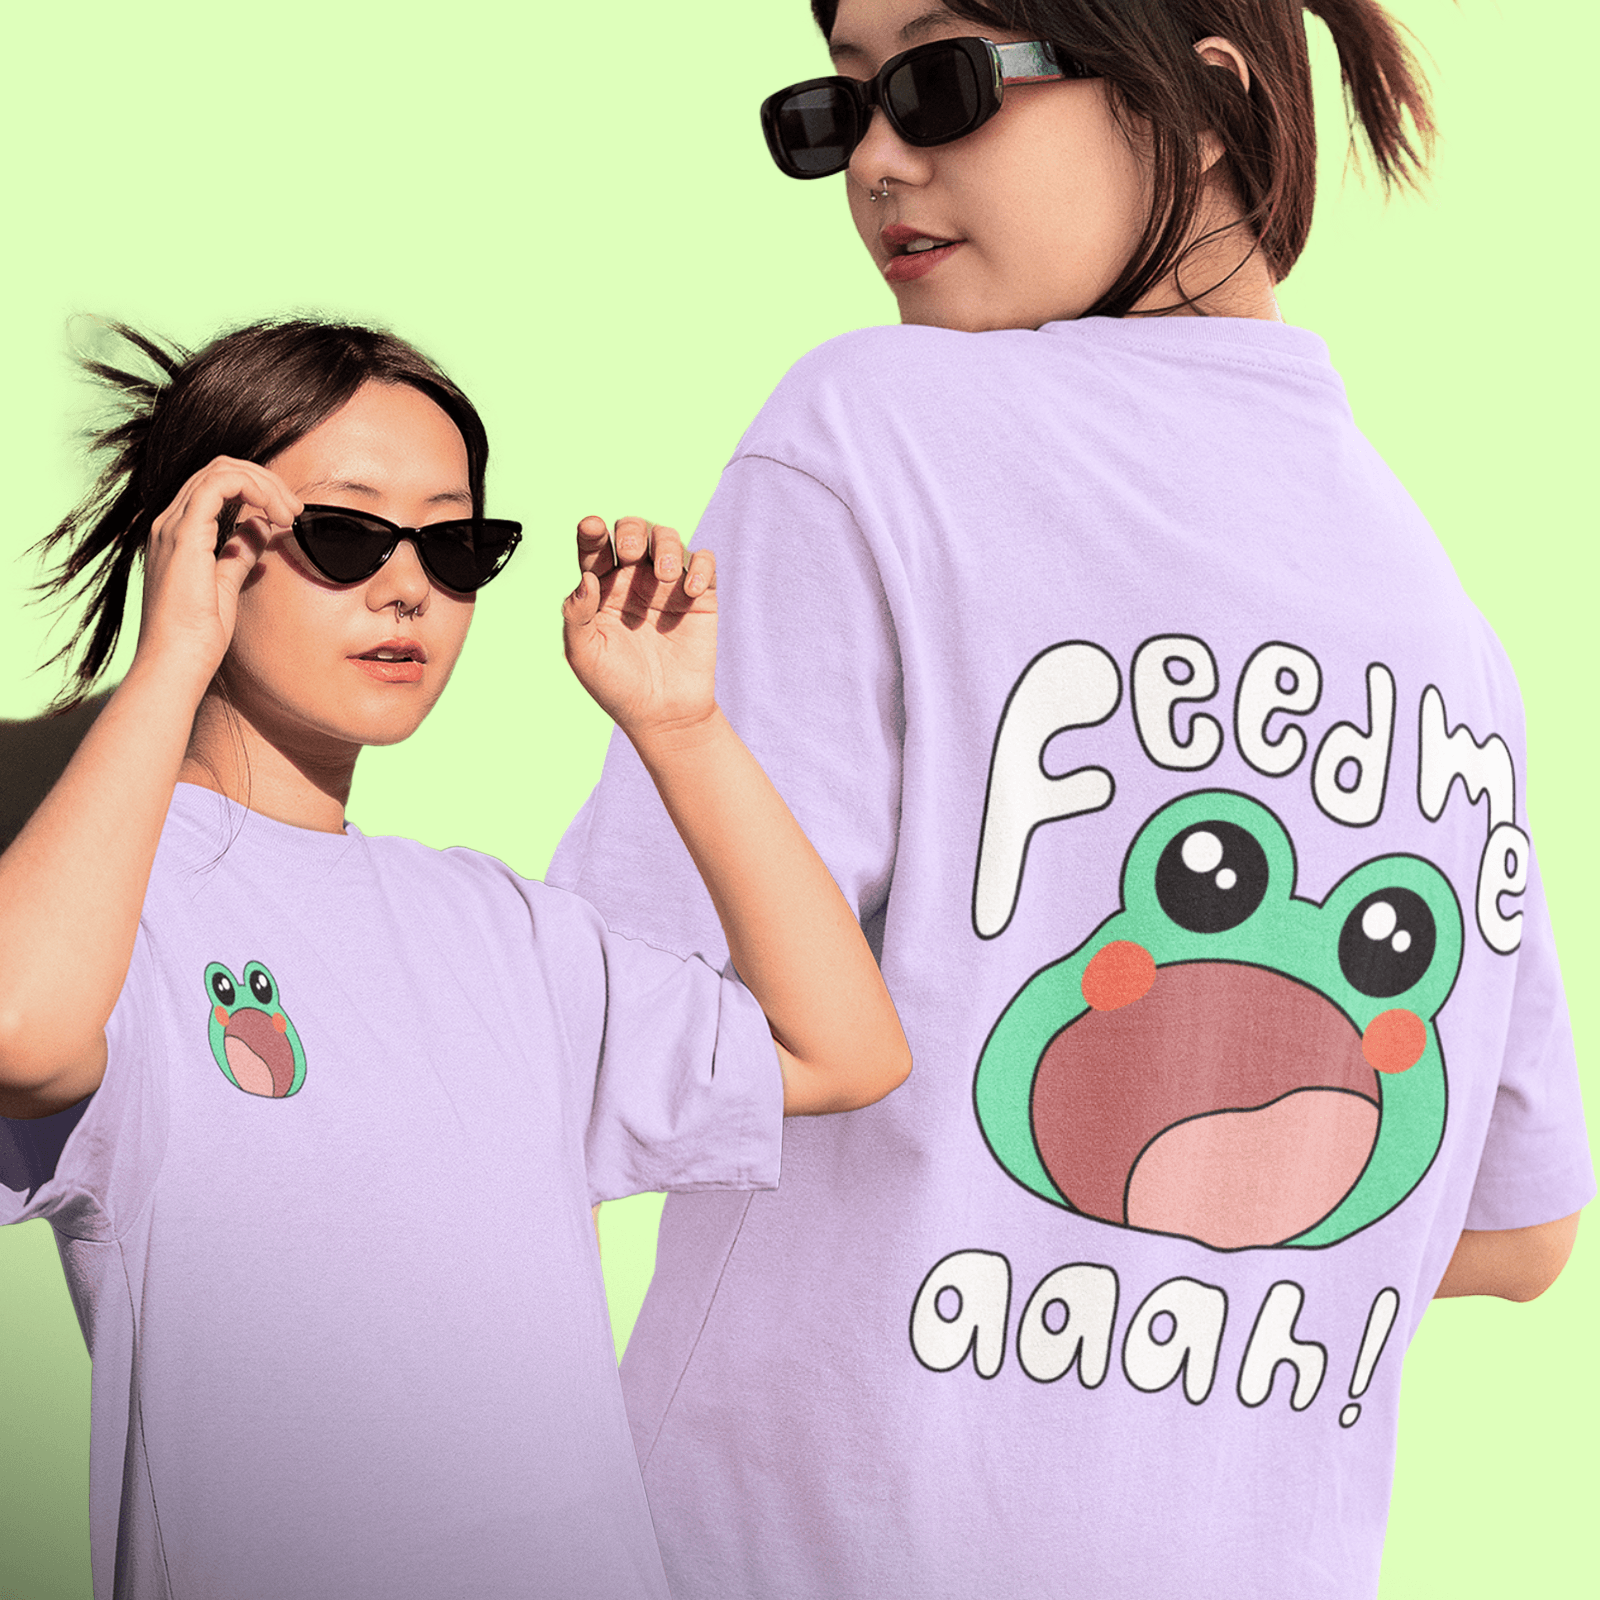 Feed Me Back Print - Hungry Toad Unisex Oversized T-shirts - Cute Stuff India